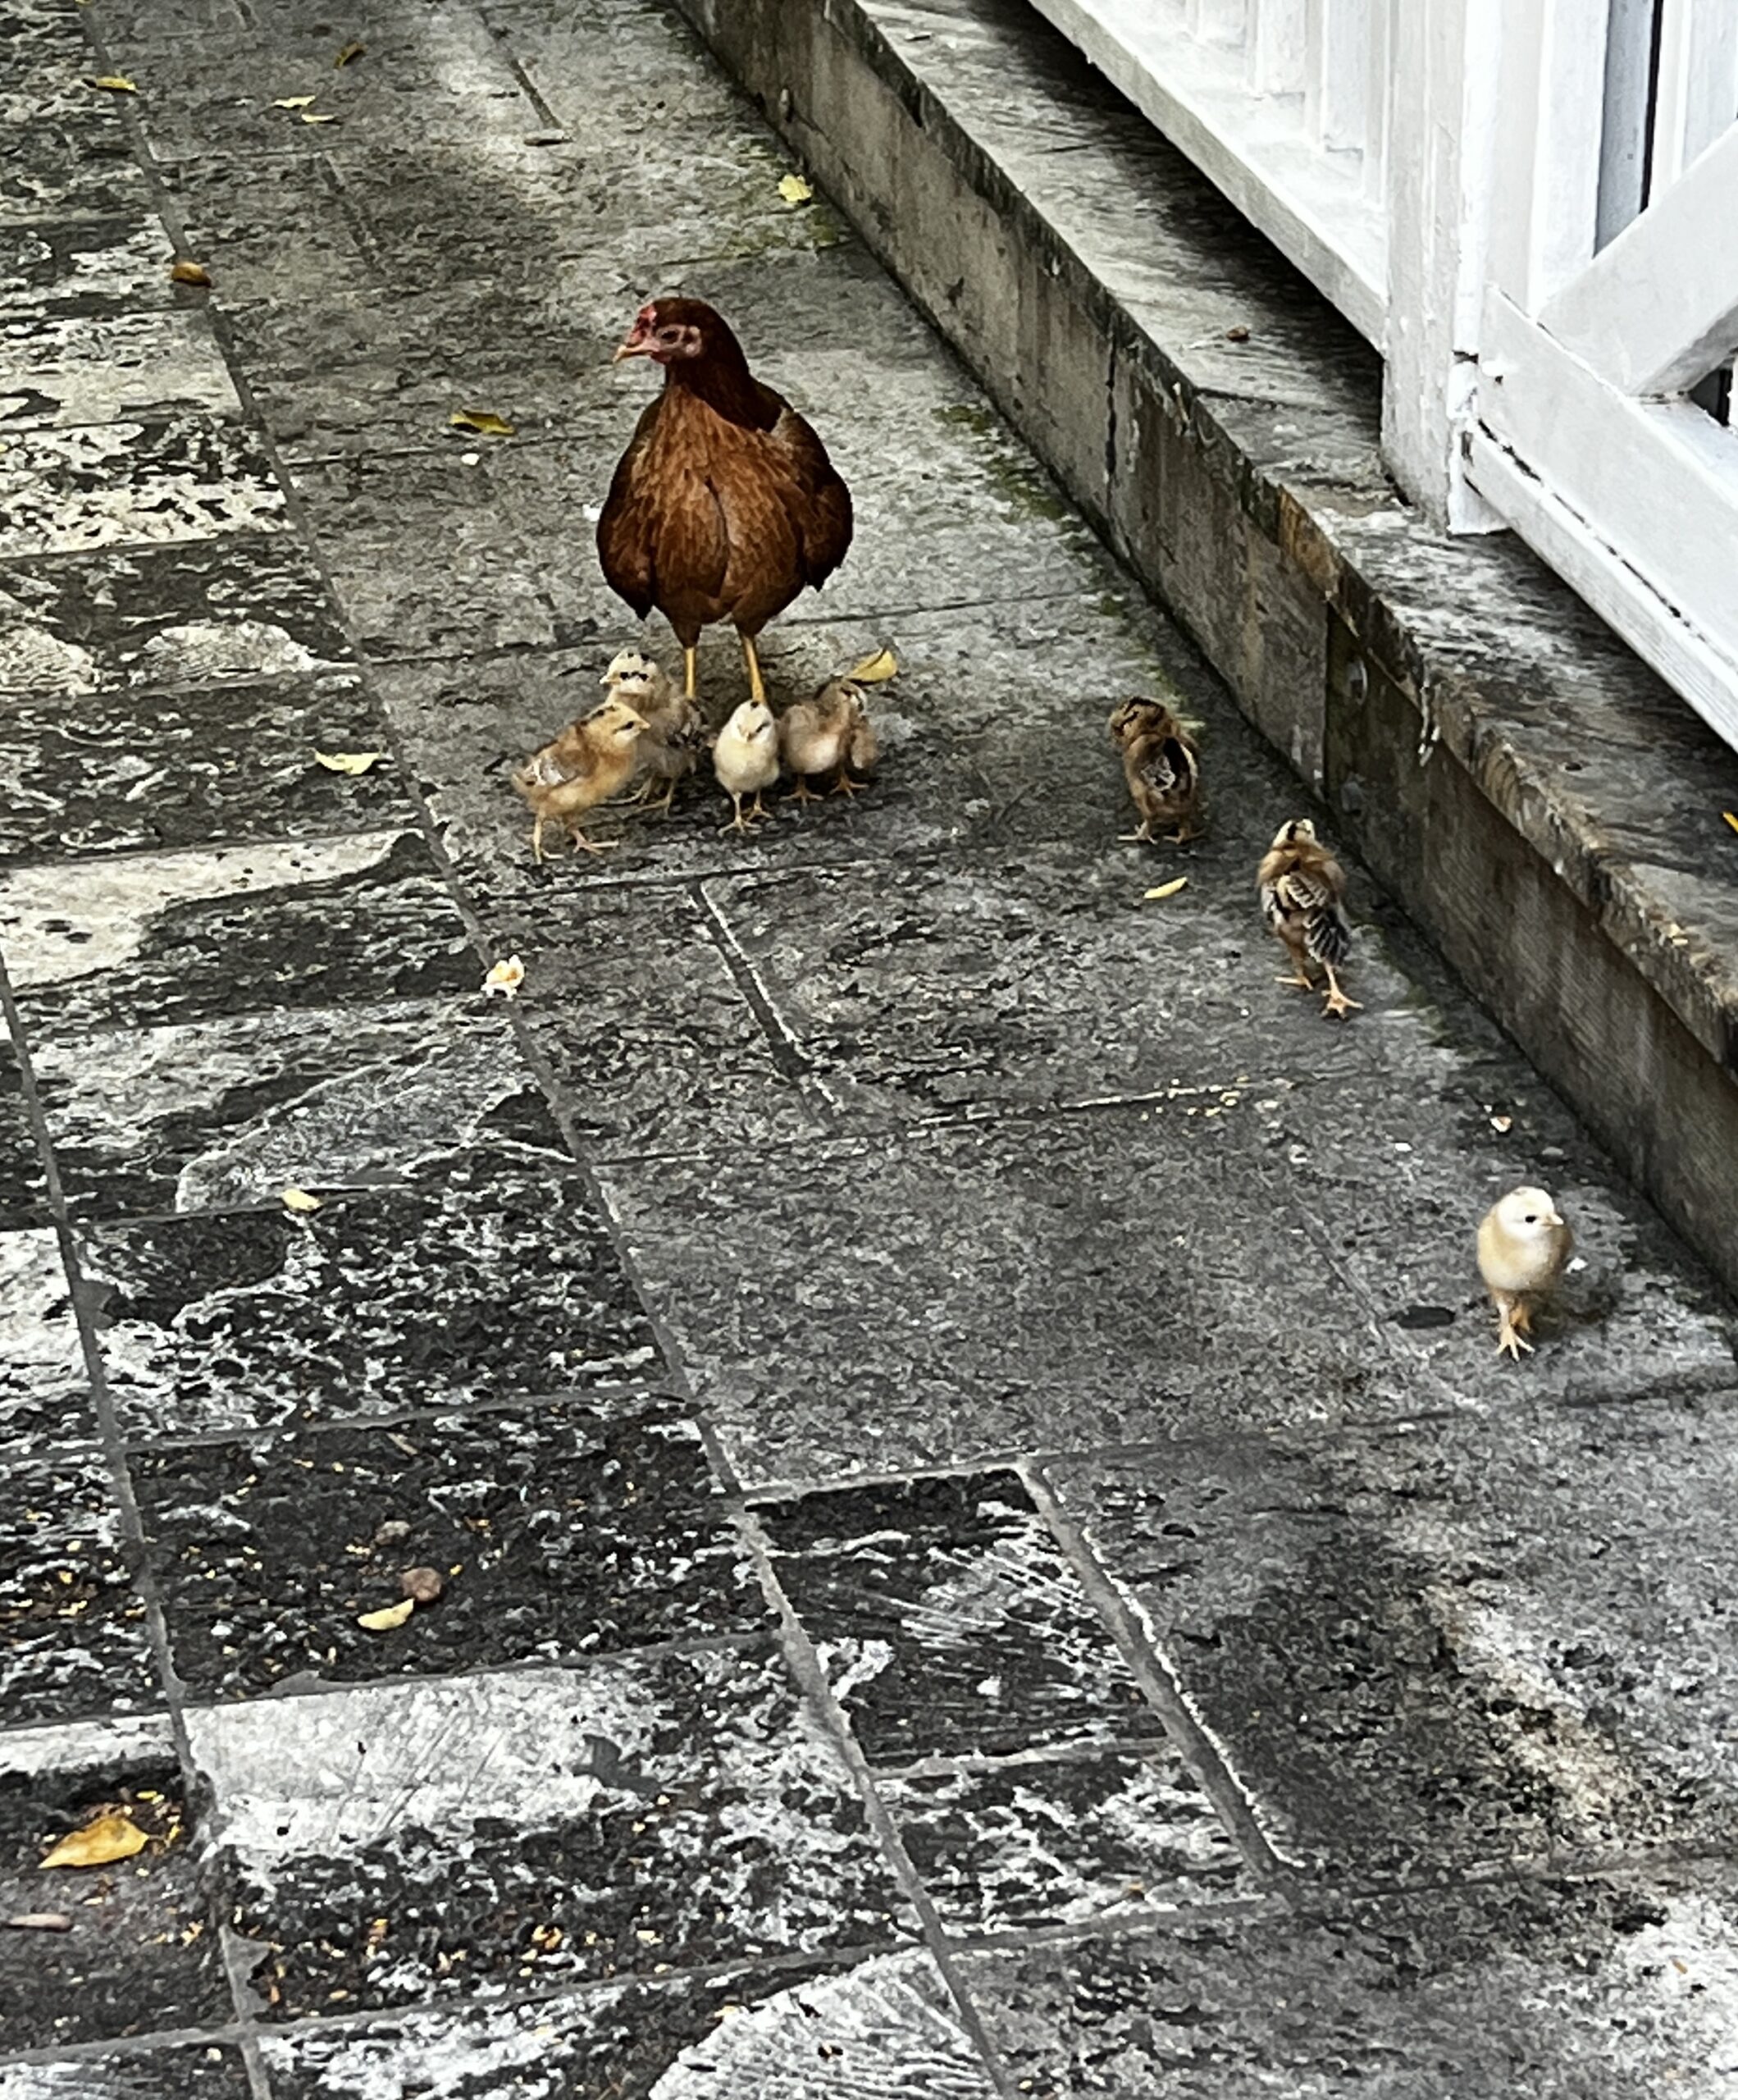 Chickens and baby chicks in Key West